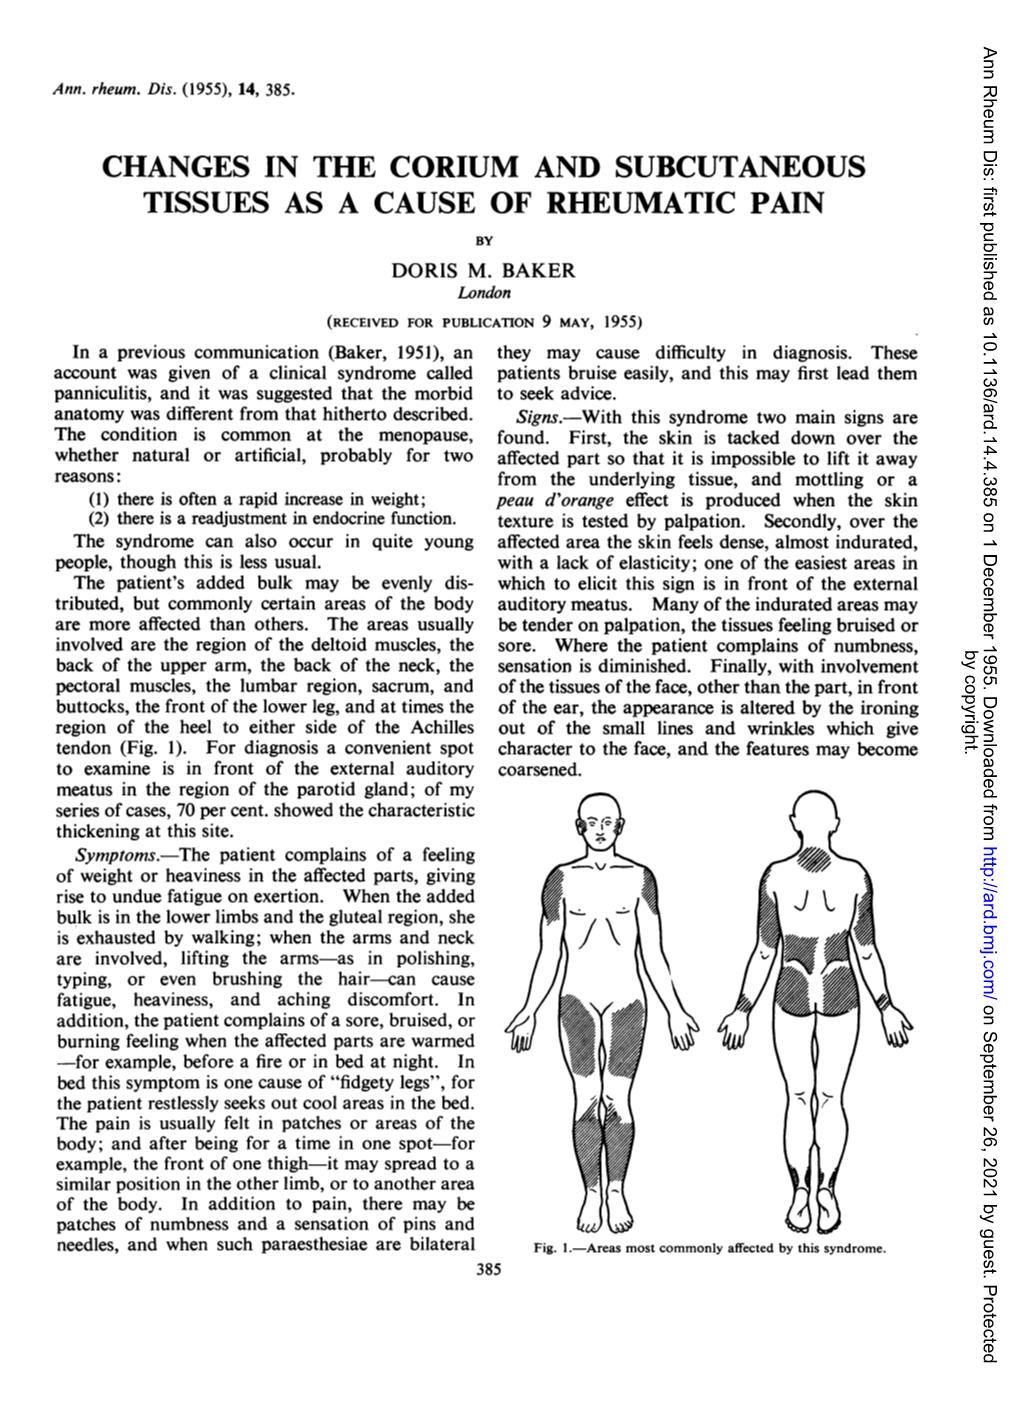 Changes in the Corium and Subcutaneous Tissues As a Cause of Rheumatic Pain by Doris M